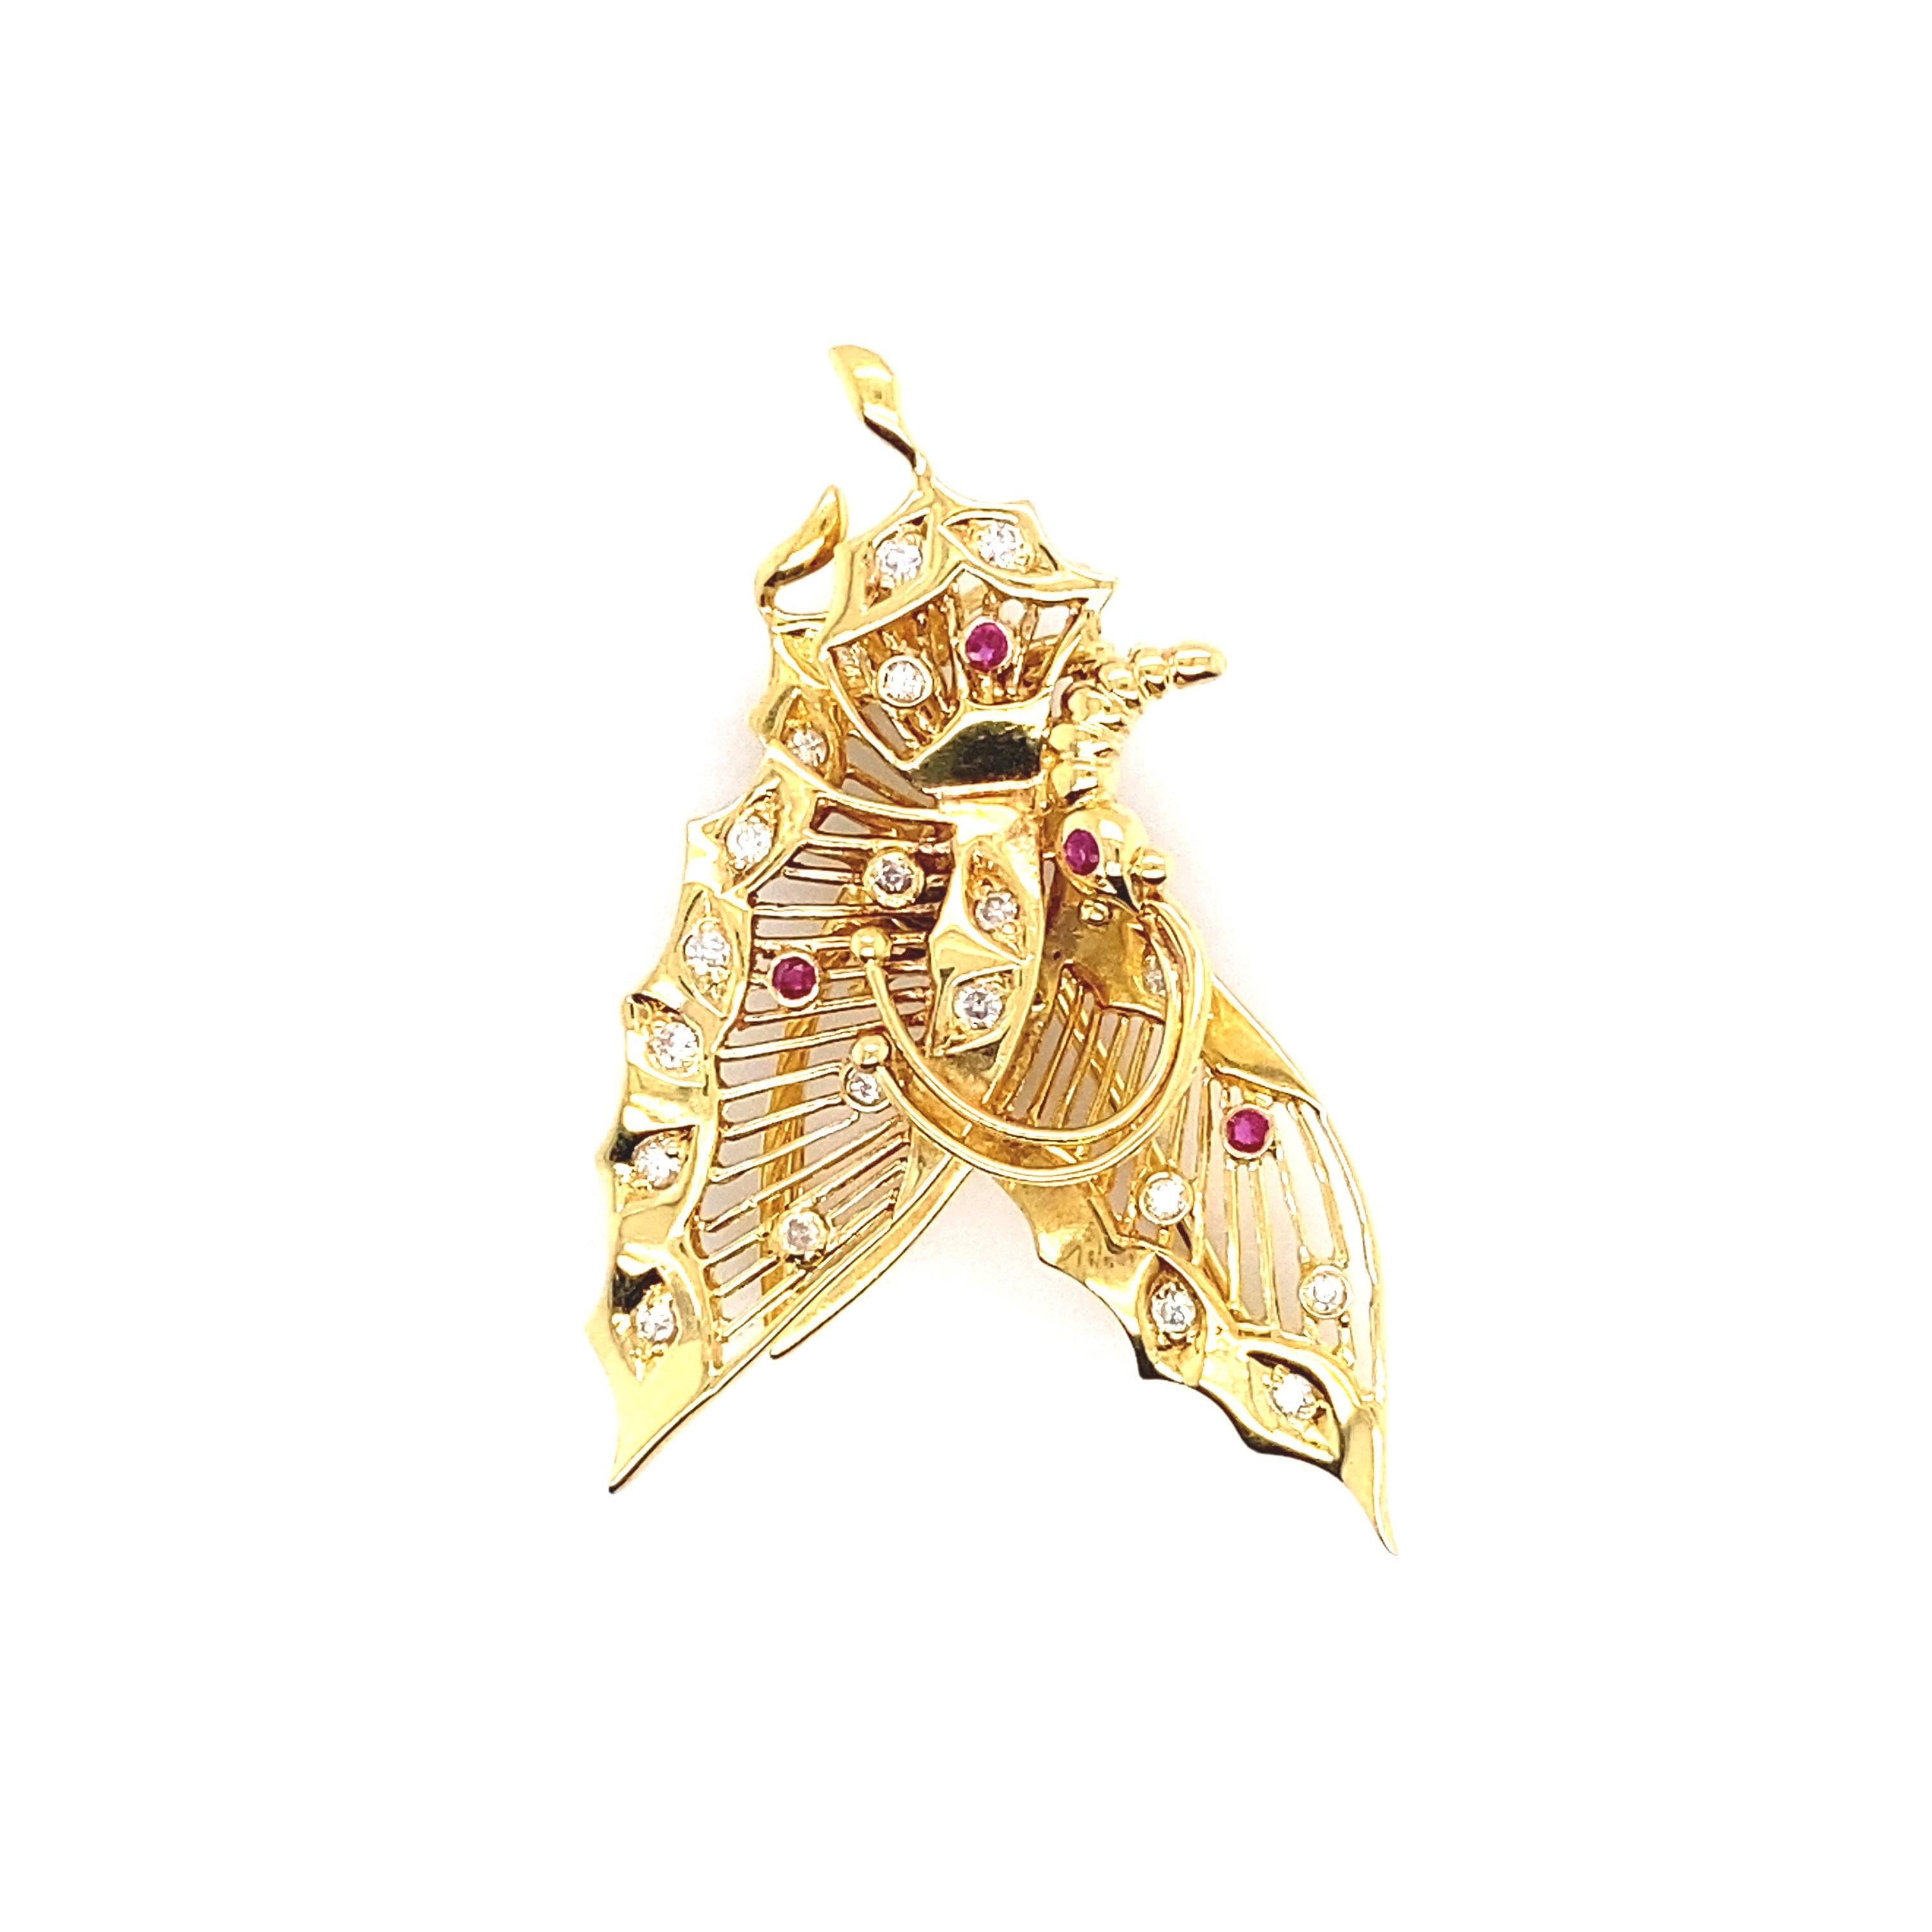 A beautiful Brooch/Pendant set in 18K Yellow Gold featuring 0.25 Carats Natural Diamonds, 0.08 Carats Rubies. Rubies are referred to as 